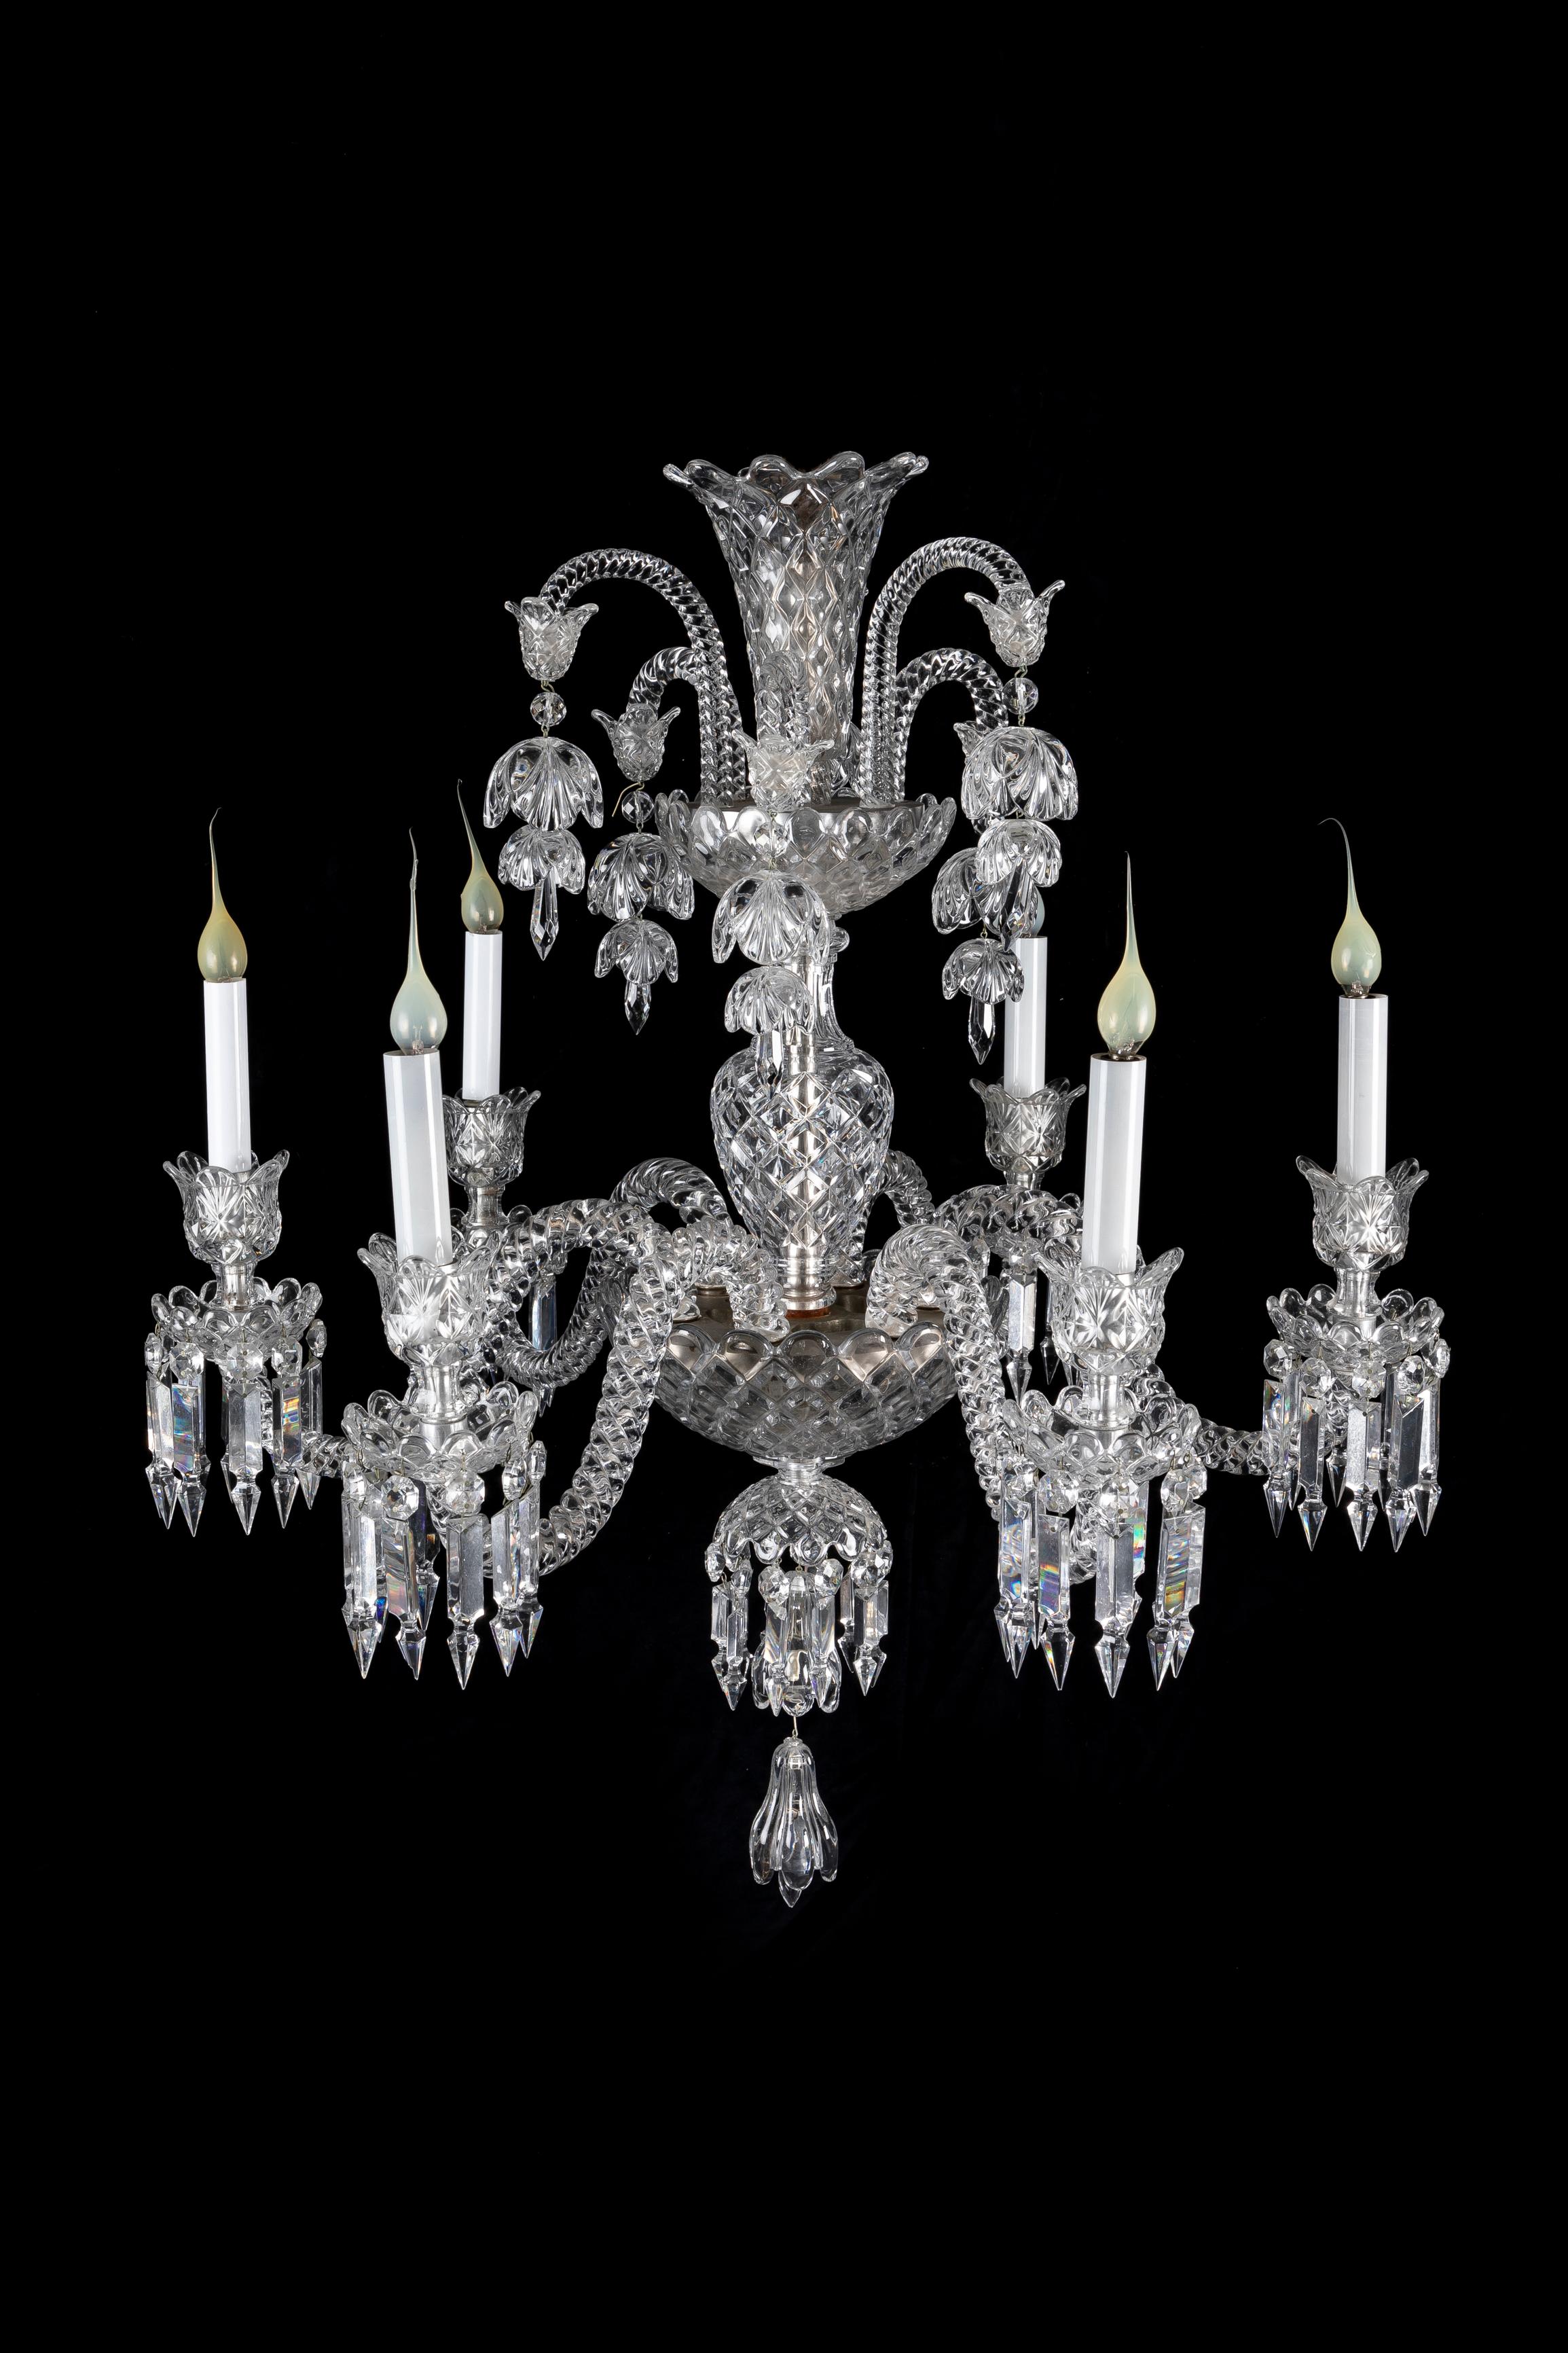 A Fine Antique French Baccarat Louis XVI Style six light crystal chandelier of exquisite craftsmanship. This unusual Baccarat crystal chandelier is constructed of six twisted crystal arms embellished with fine cut crystal prisms and further the top